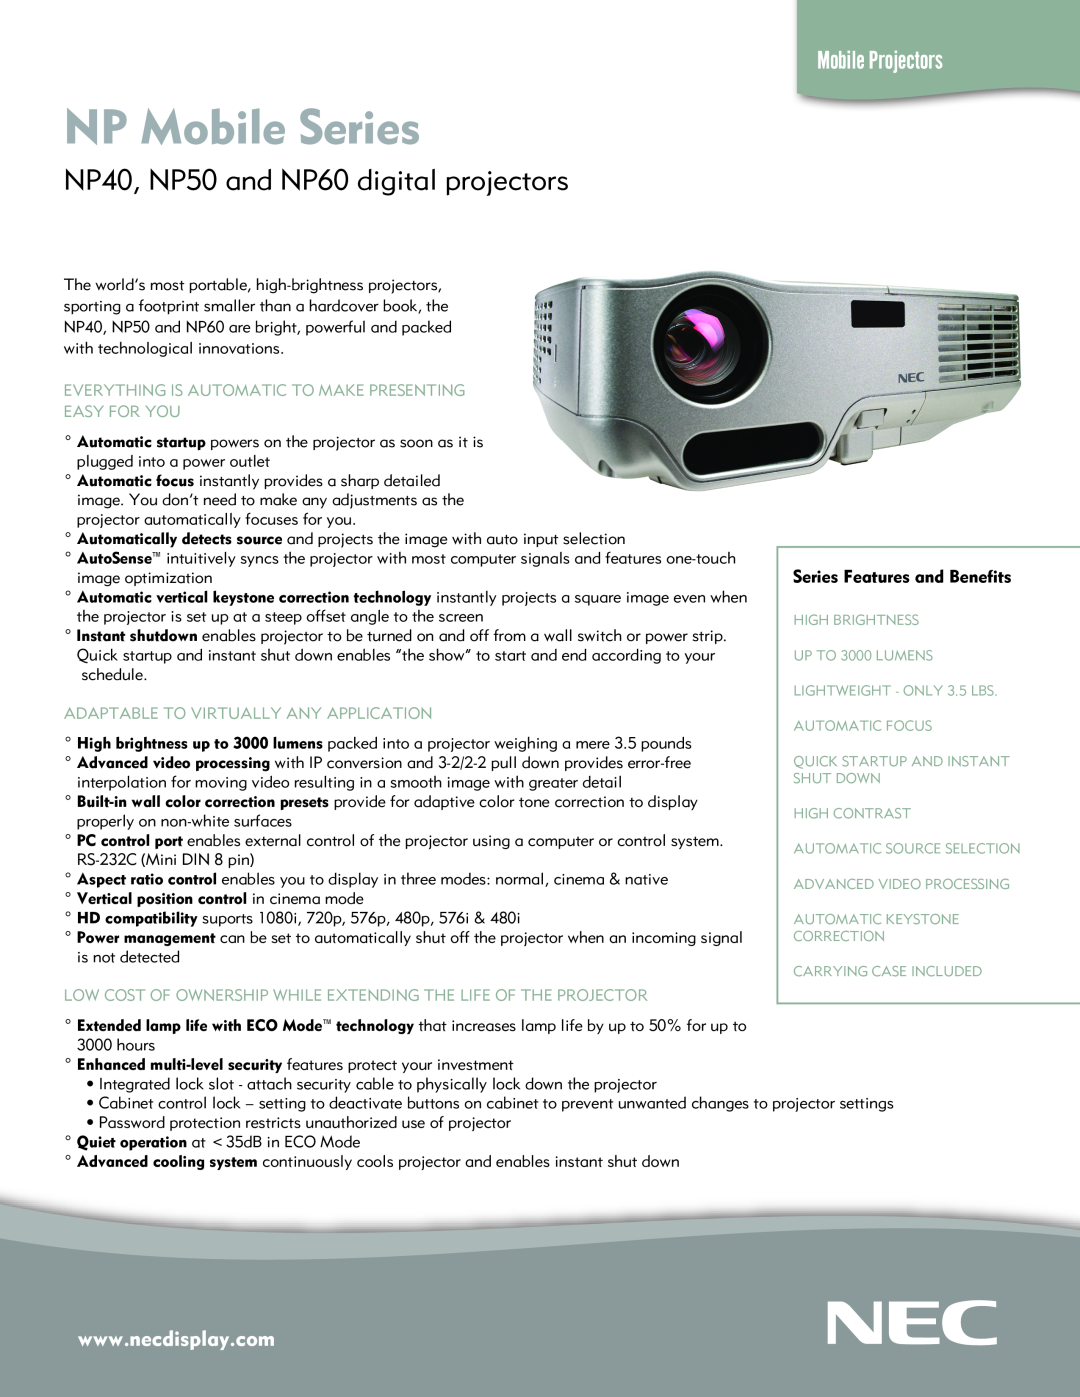 NEC quick start NP Mobile Series, NP40, NP50 and NP60 digital projectors, Mobile Projectors, Easy For You 